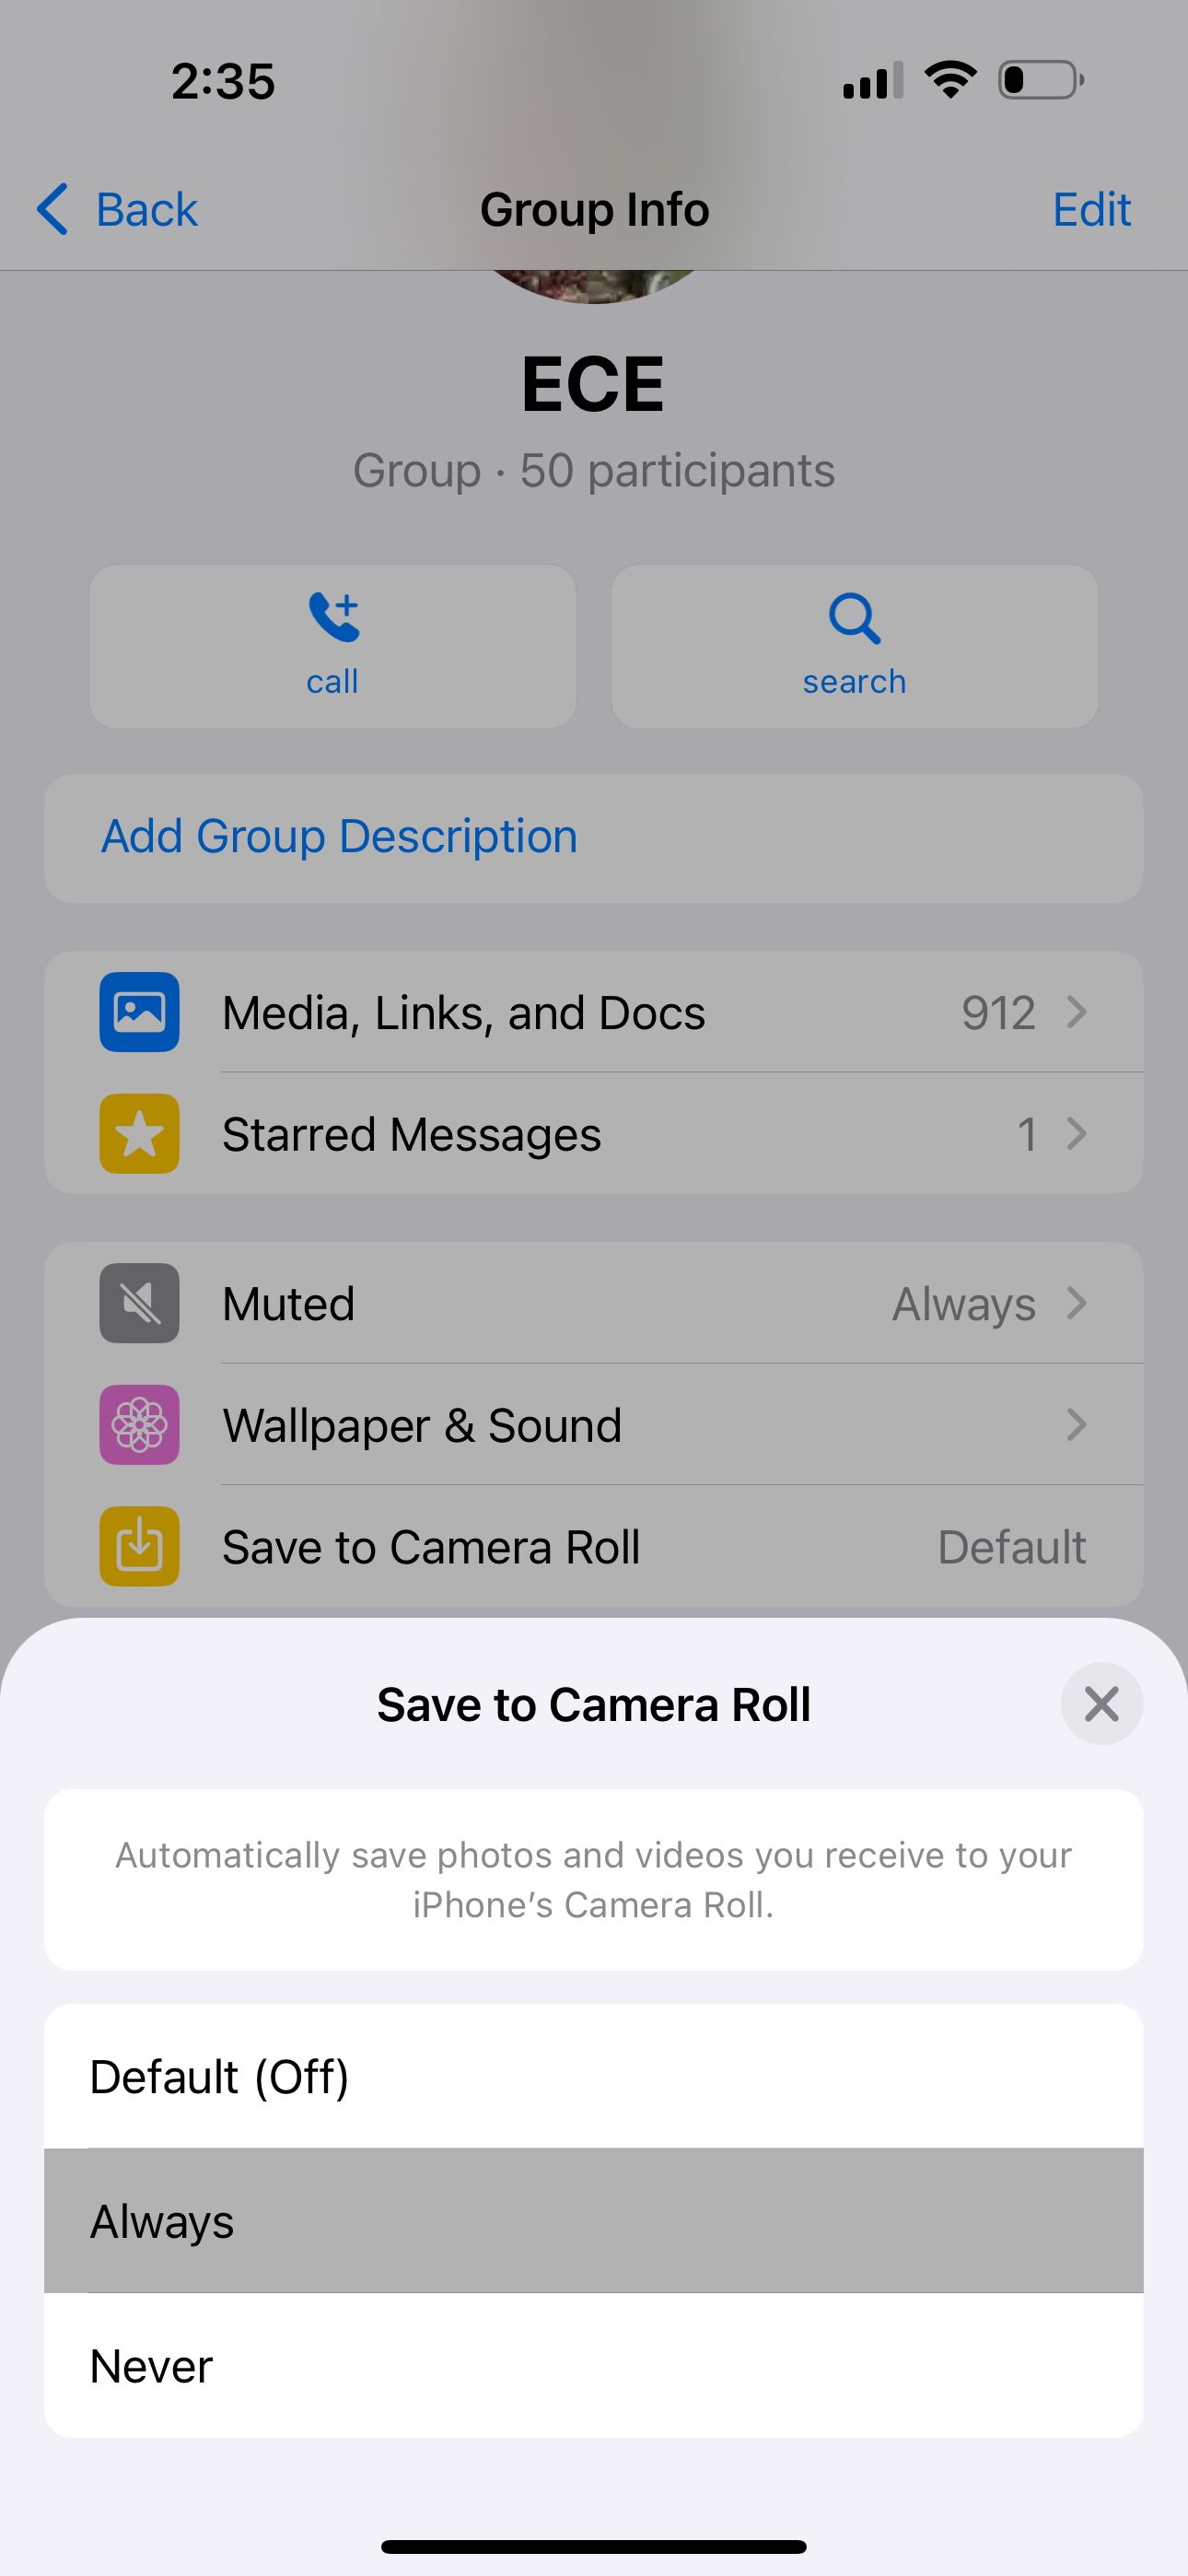 Save to Camera Roll setting for WhatsApp group